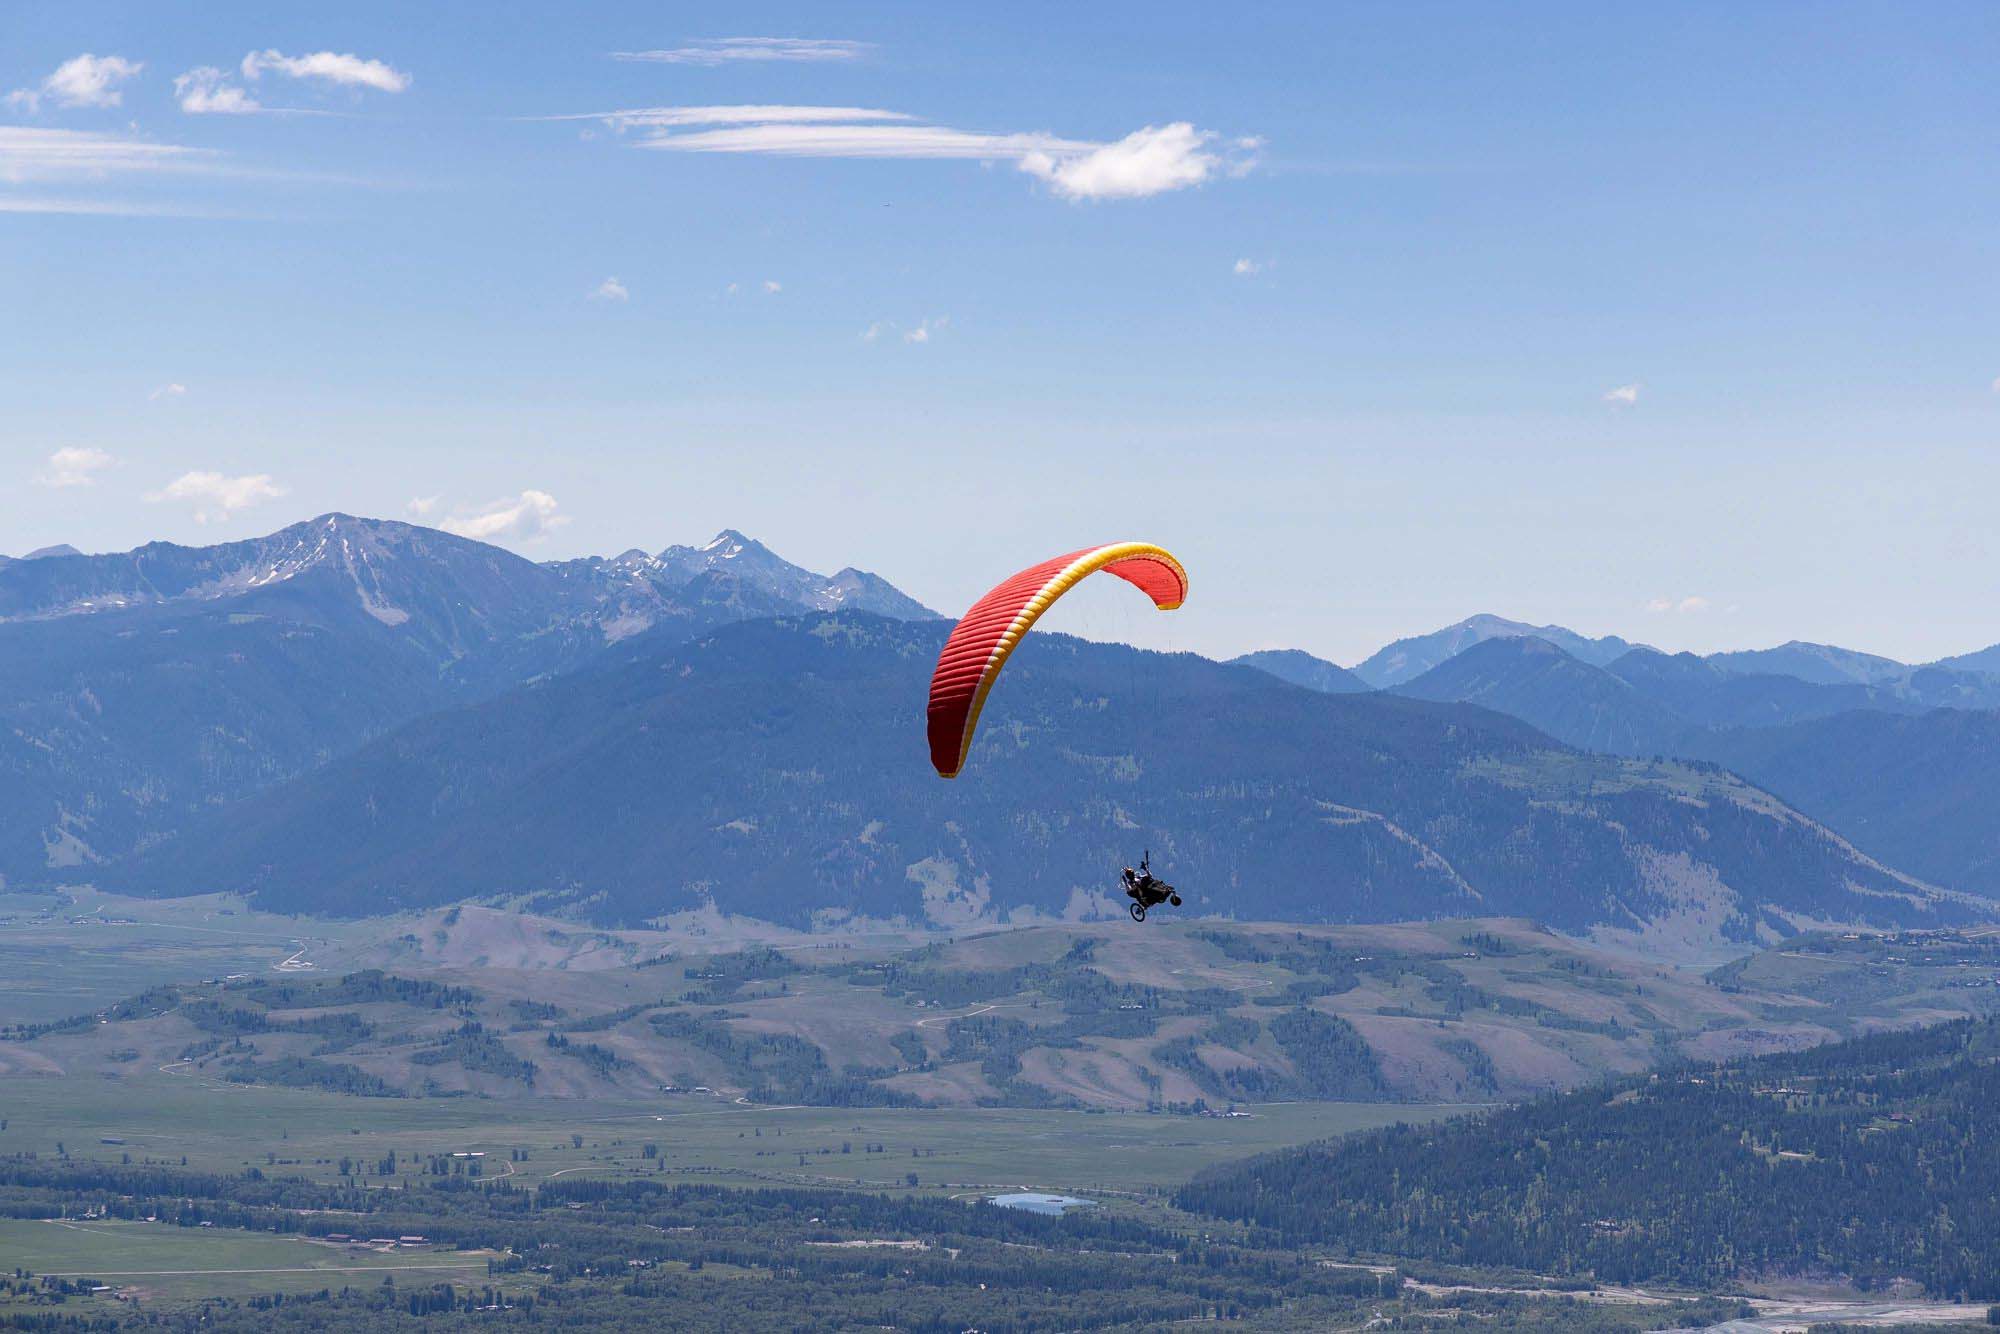 adaptive paragliding with mountains in background